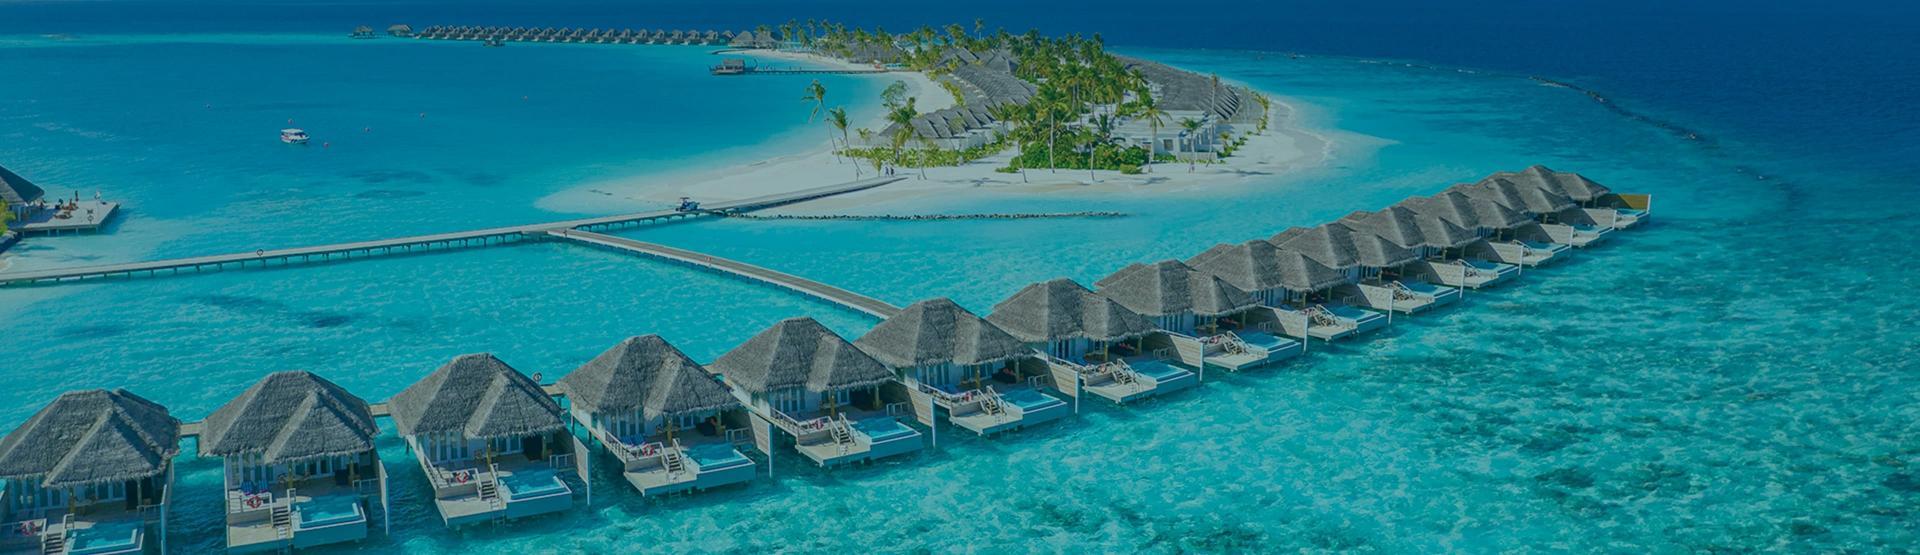 Find the Best HotelsS in Maldives